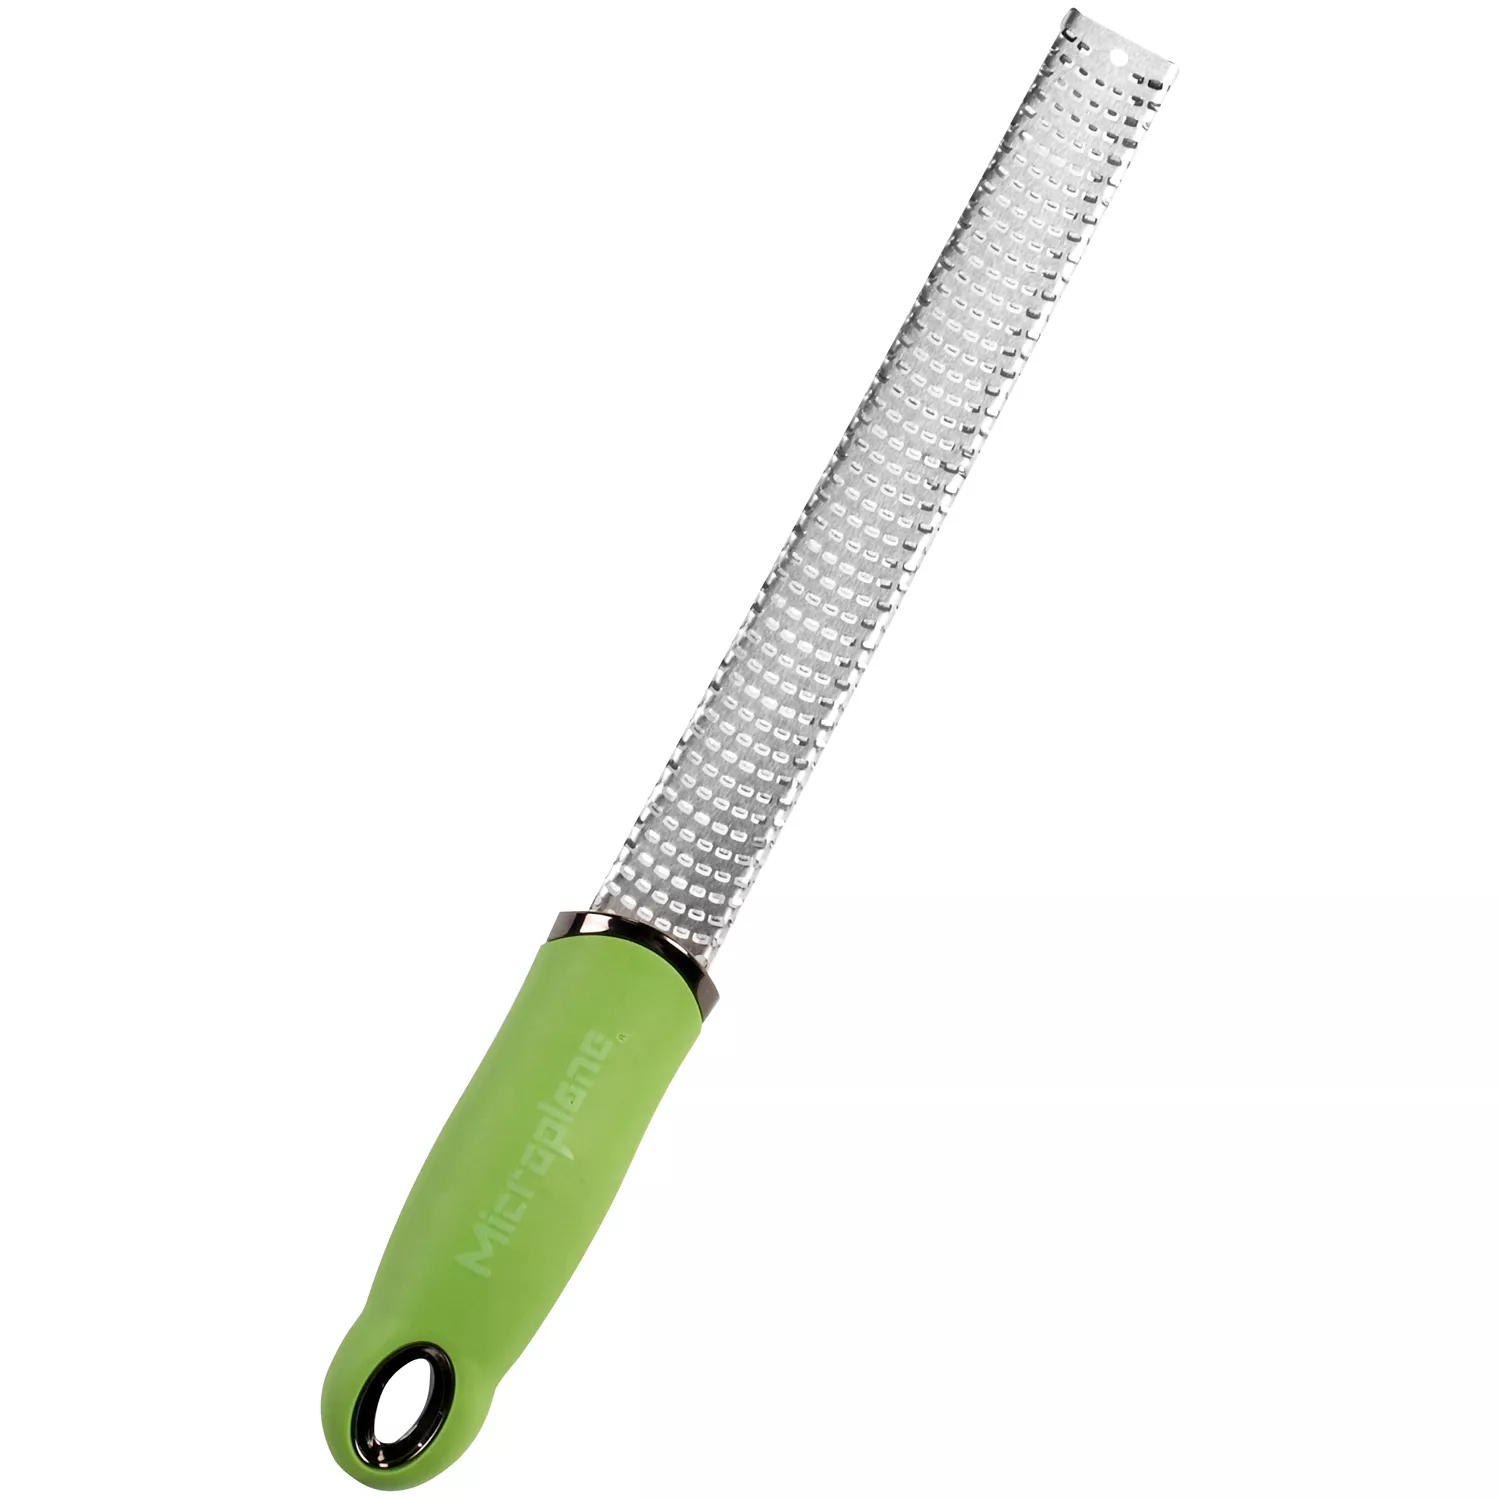 Microplane Yellow Rasp Grater/Zester + Reviews